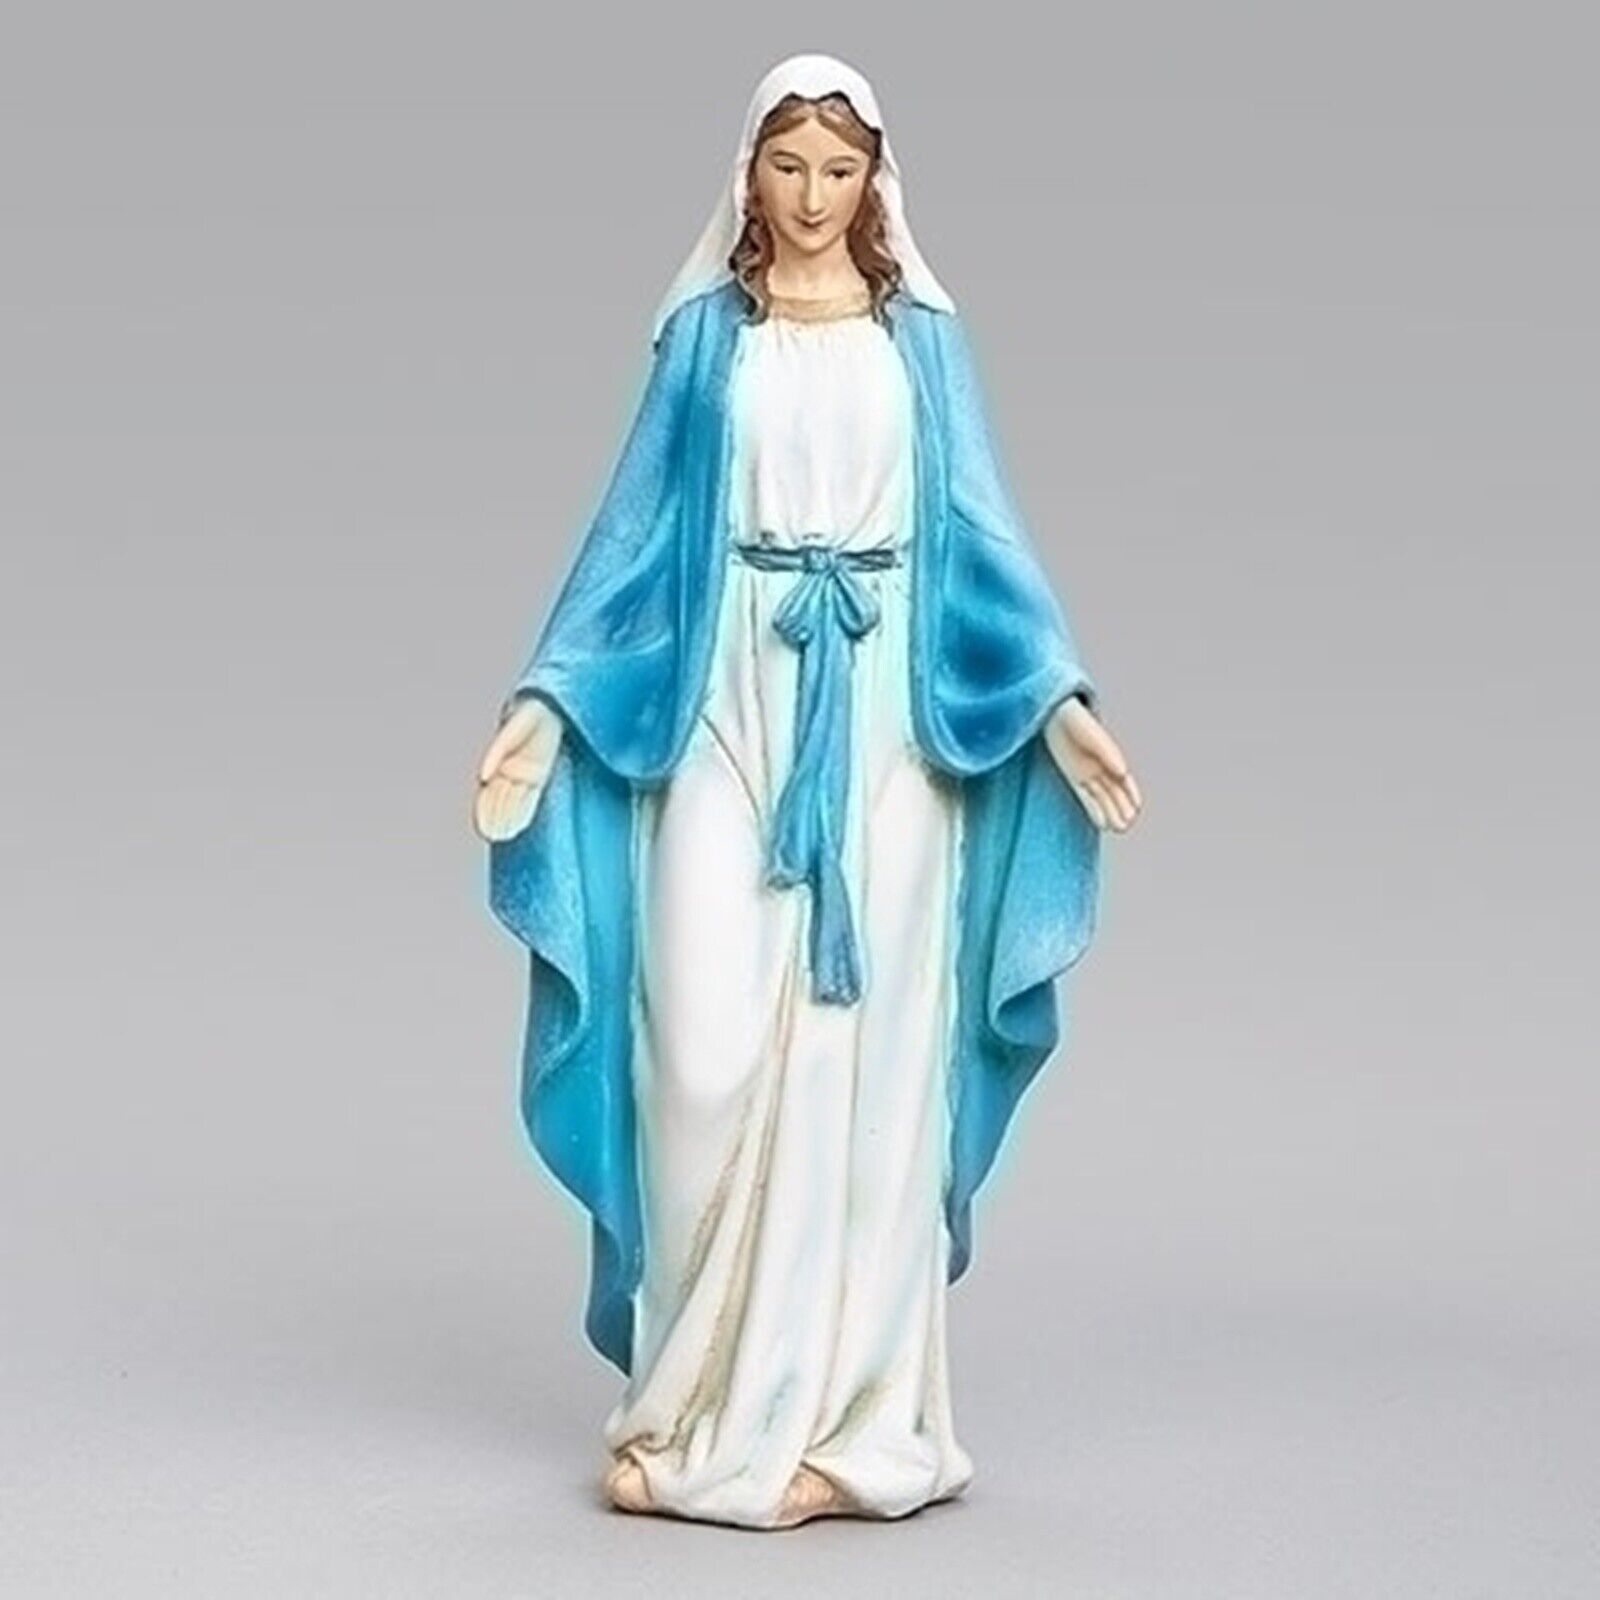 Our Lady of Grace Blessed Virgin Mary Catholic Statue